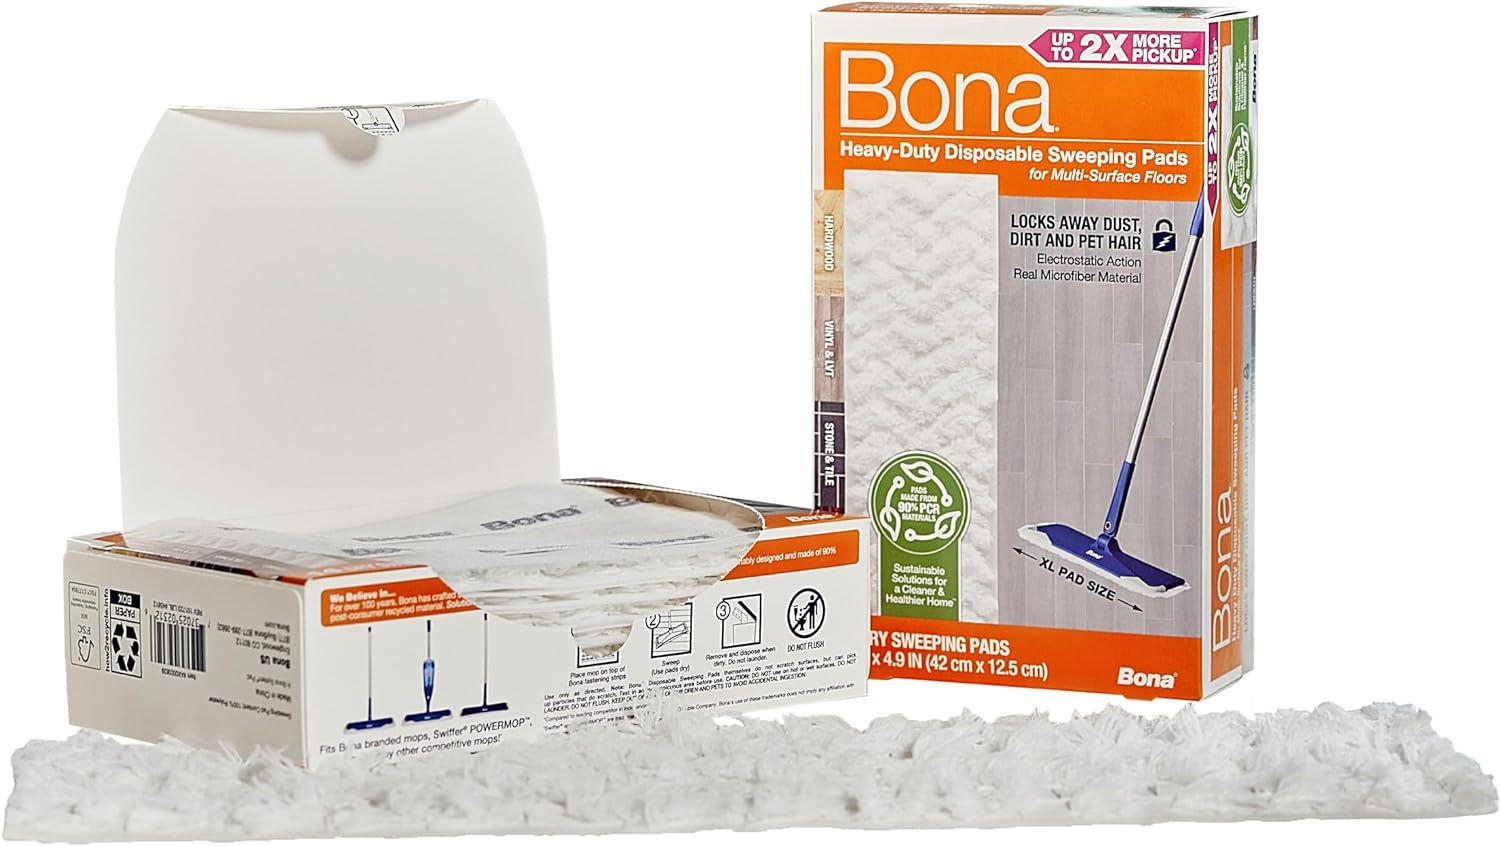 Bona Heavy Duty Disposable Sweeping Pads for Multi-Surface Floors, 24 ct Pack